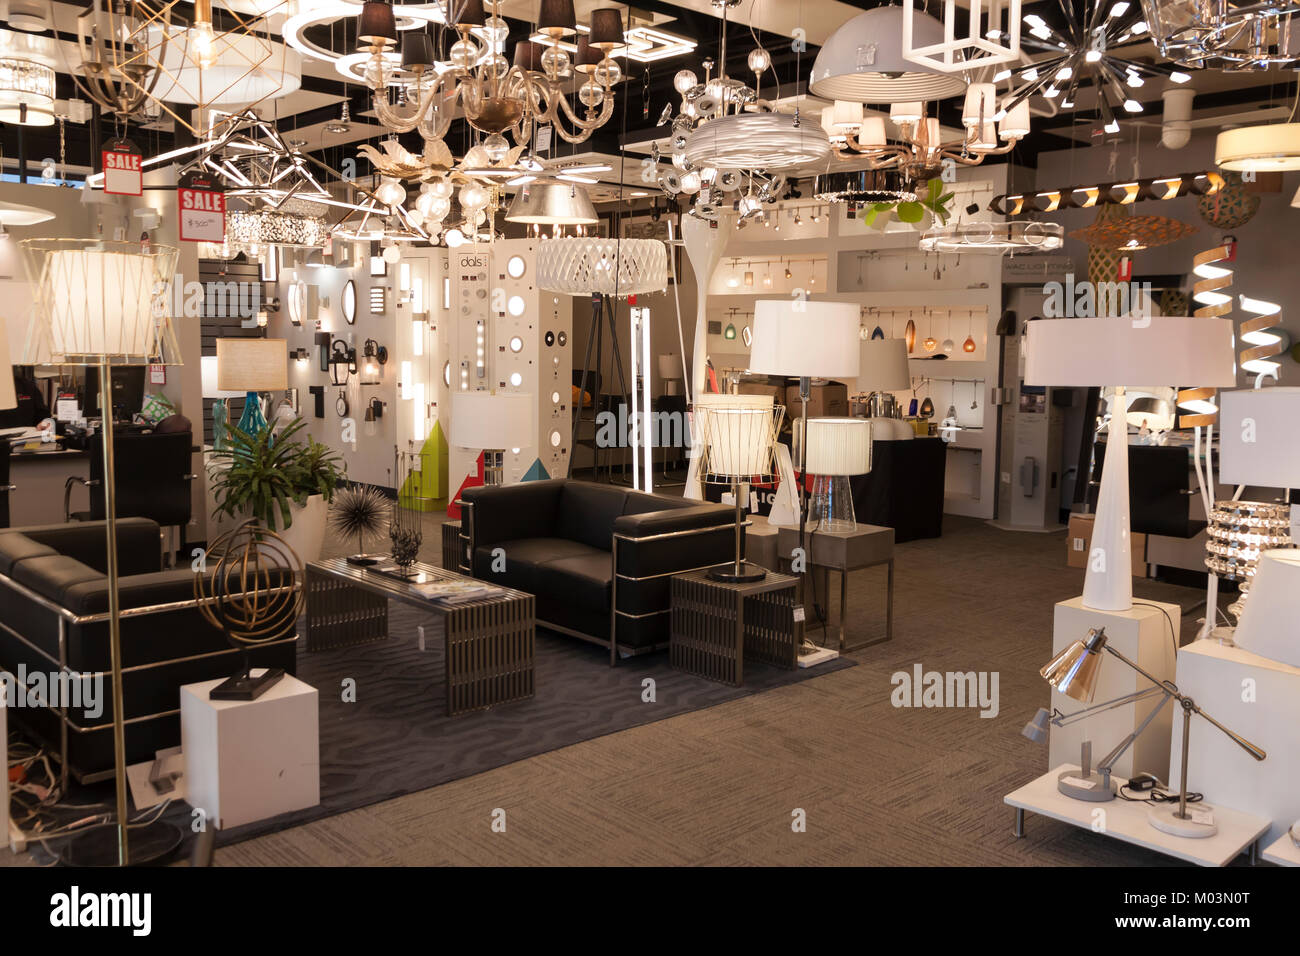 Modern lighting and lamps on display in a retail store interior. Stock Photo